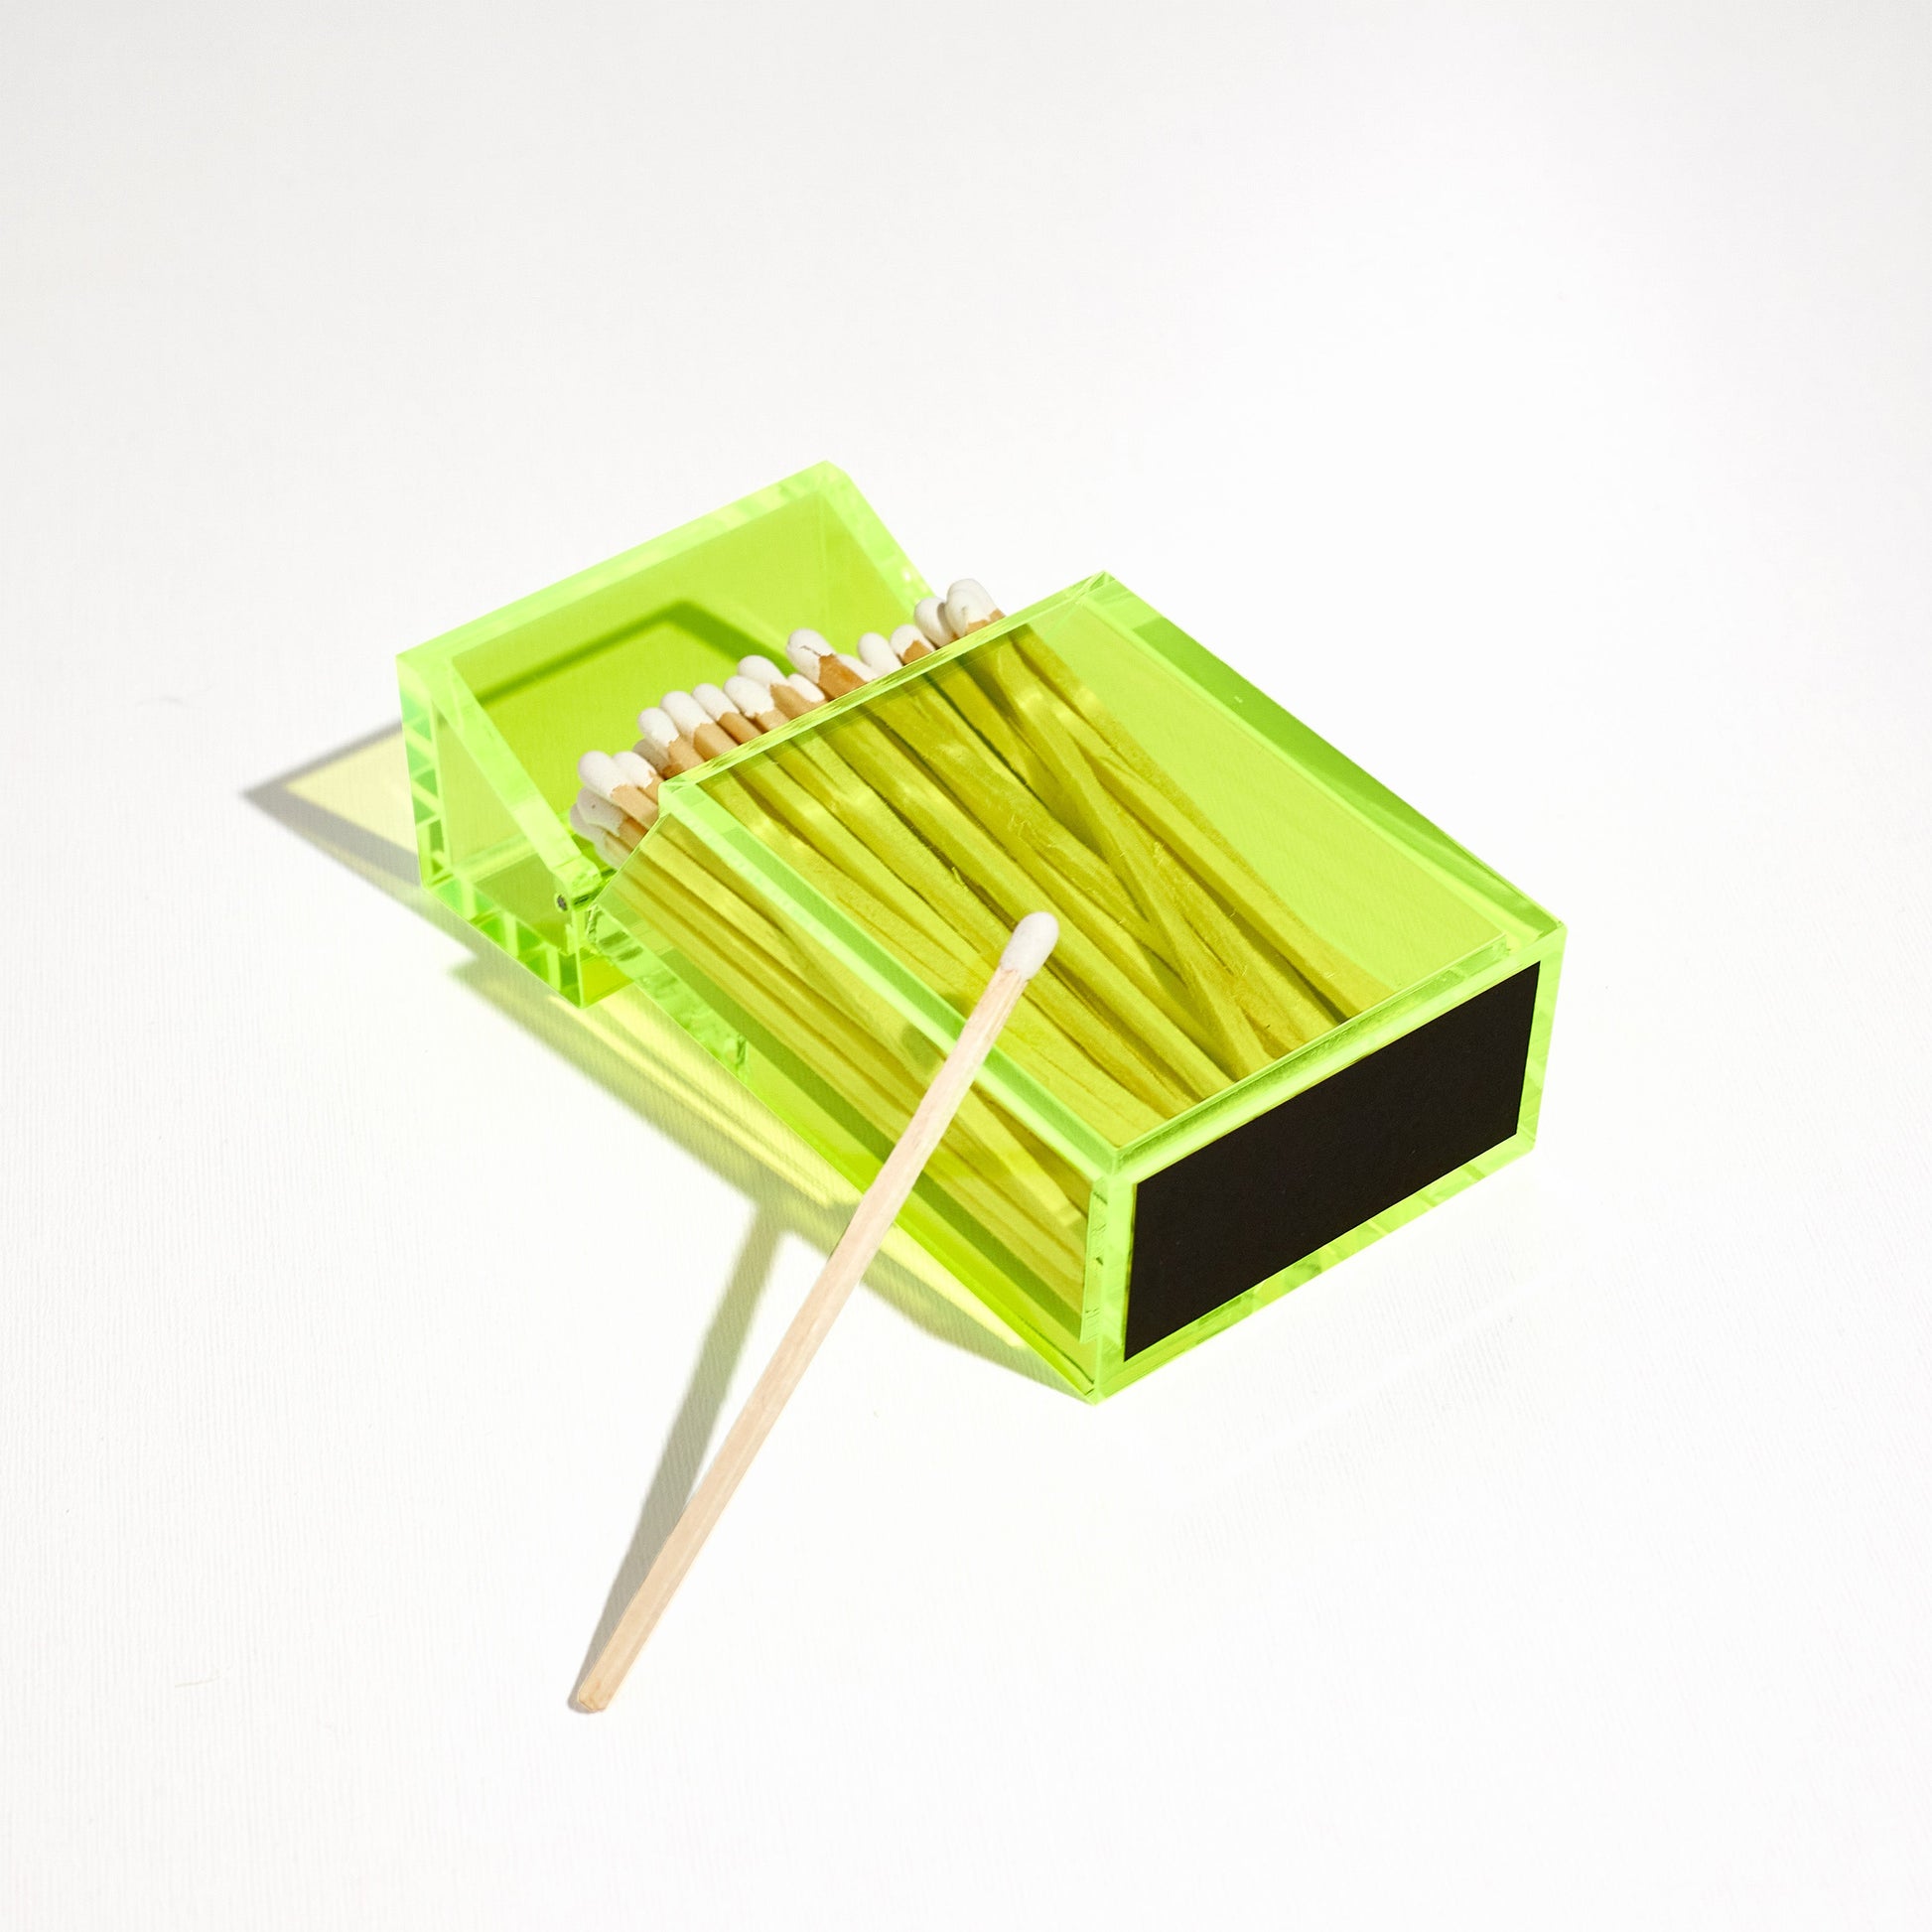 Opened Match holder shaped like a Cigarette Case. Made with neon green acrylic. Case holds White matches in it. Laying flat to feature the striker at the bottom. 